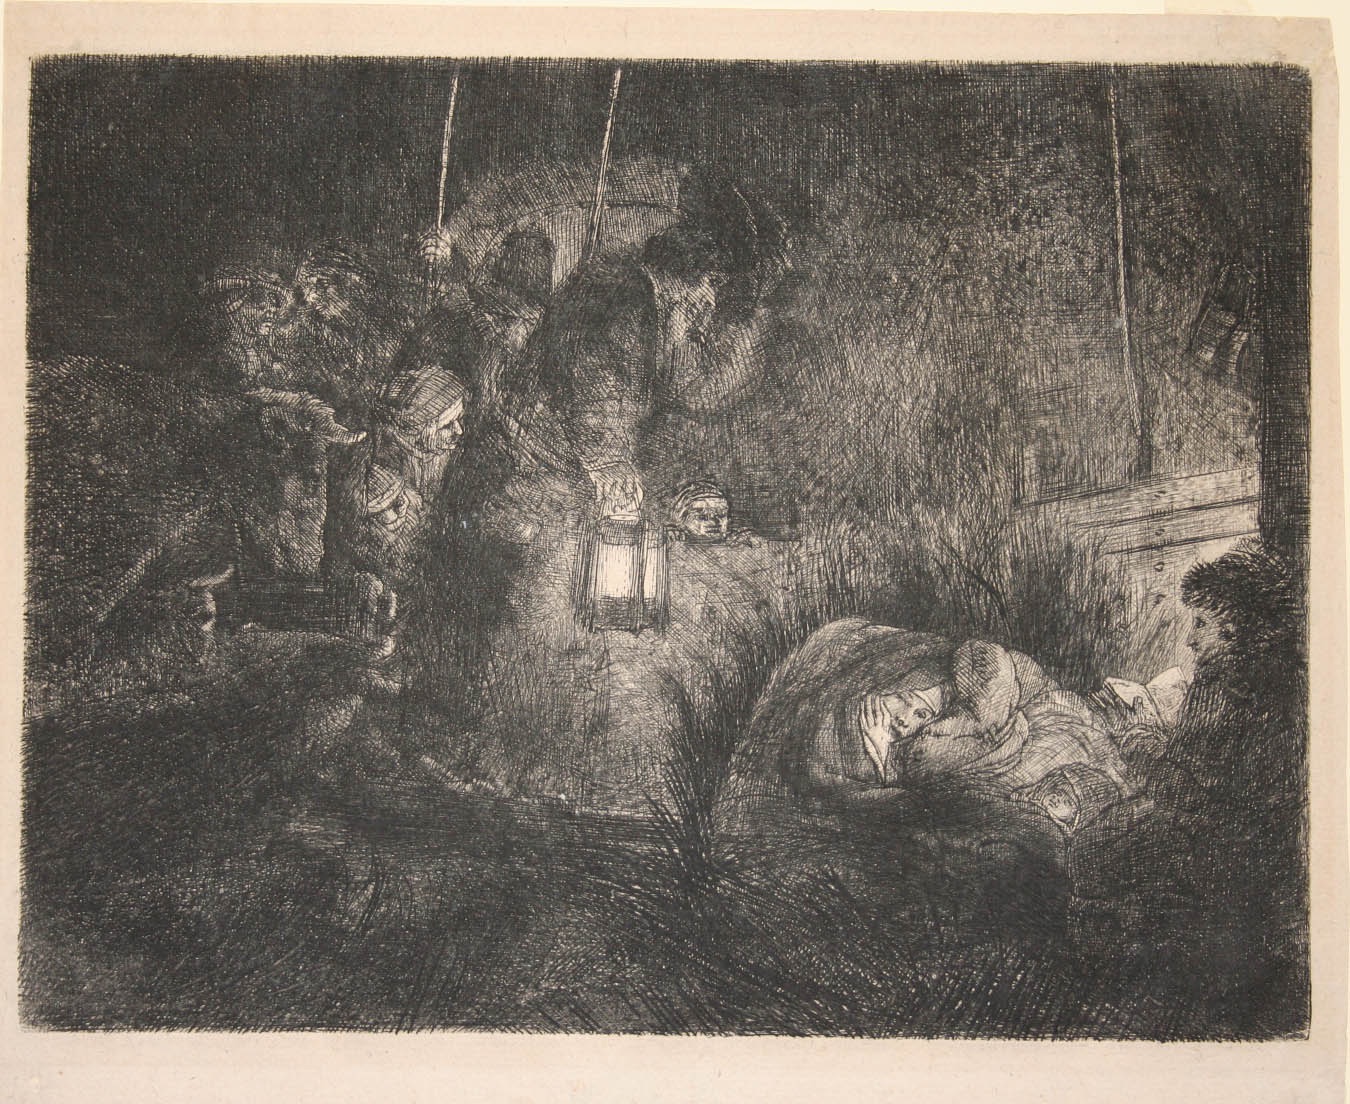 Rembrandt van Rijn (Dutch, 1606-1669), Adoration of the Shepherds, ca. 1652, etching and drypoint. Museums Collections, Gift of Mrs. John Sloan